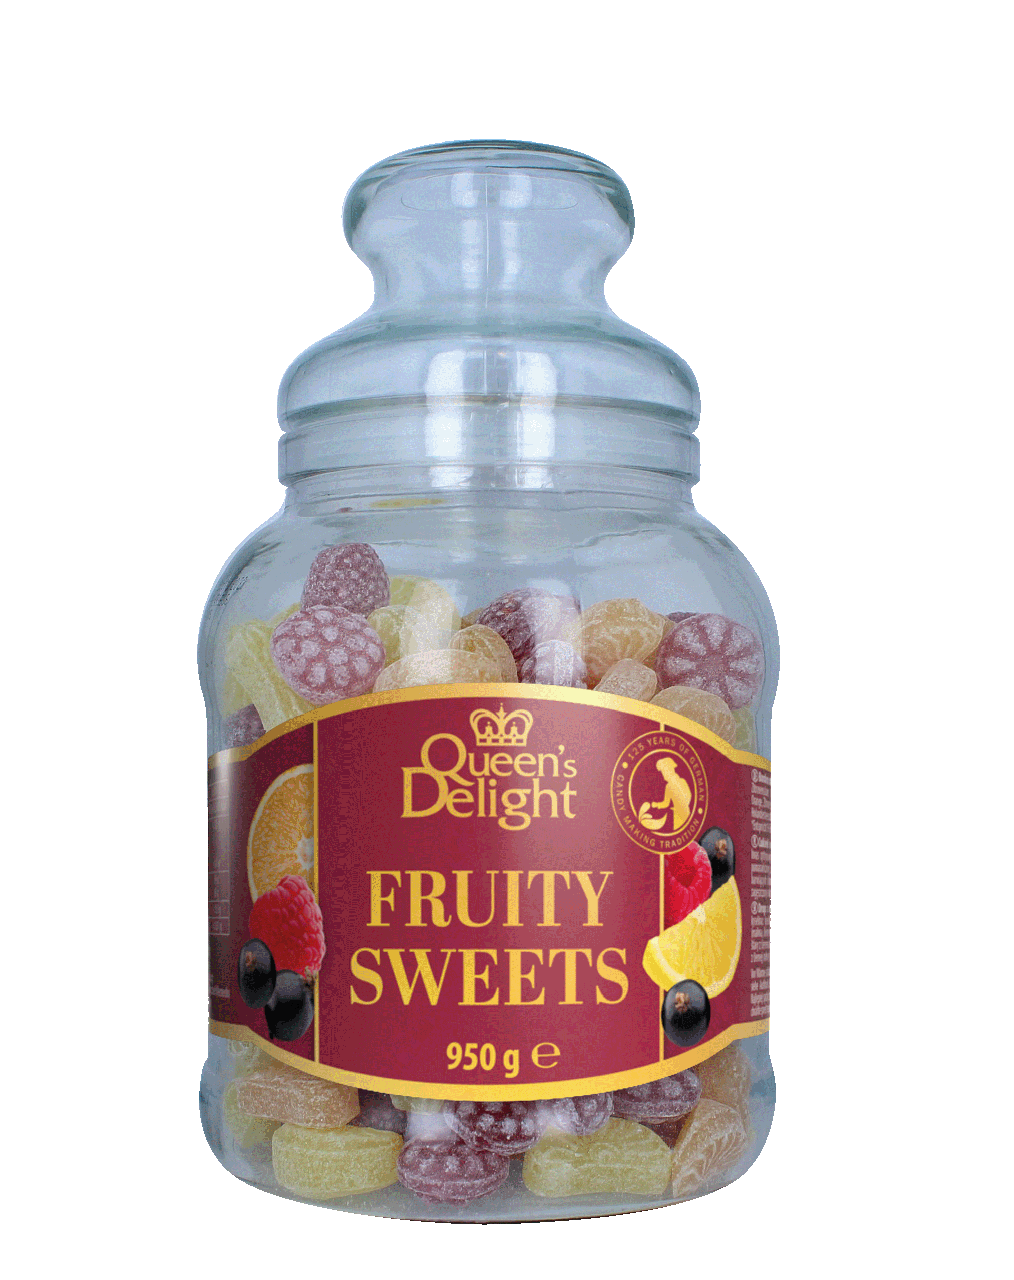 Леденцы Queen's Delight Fruity Sweets 950g